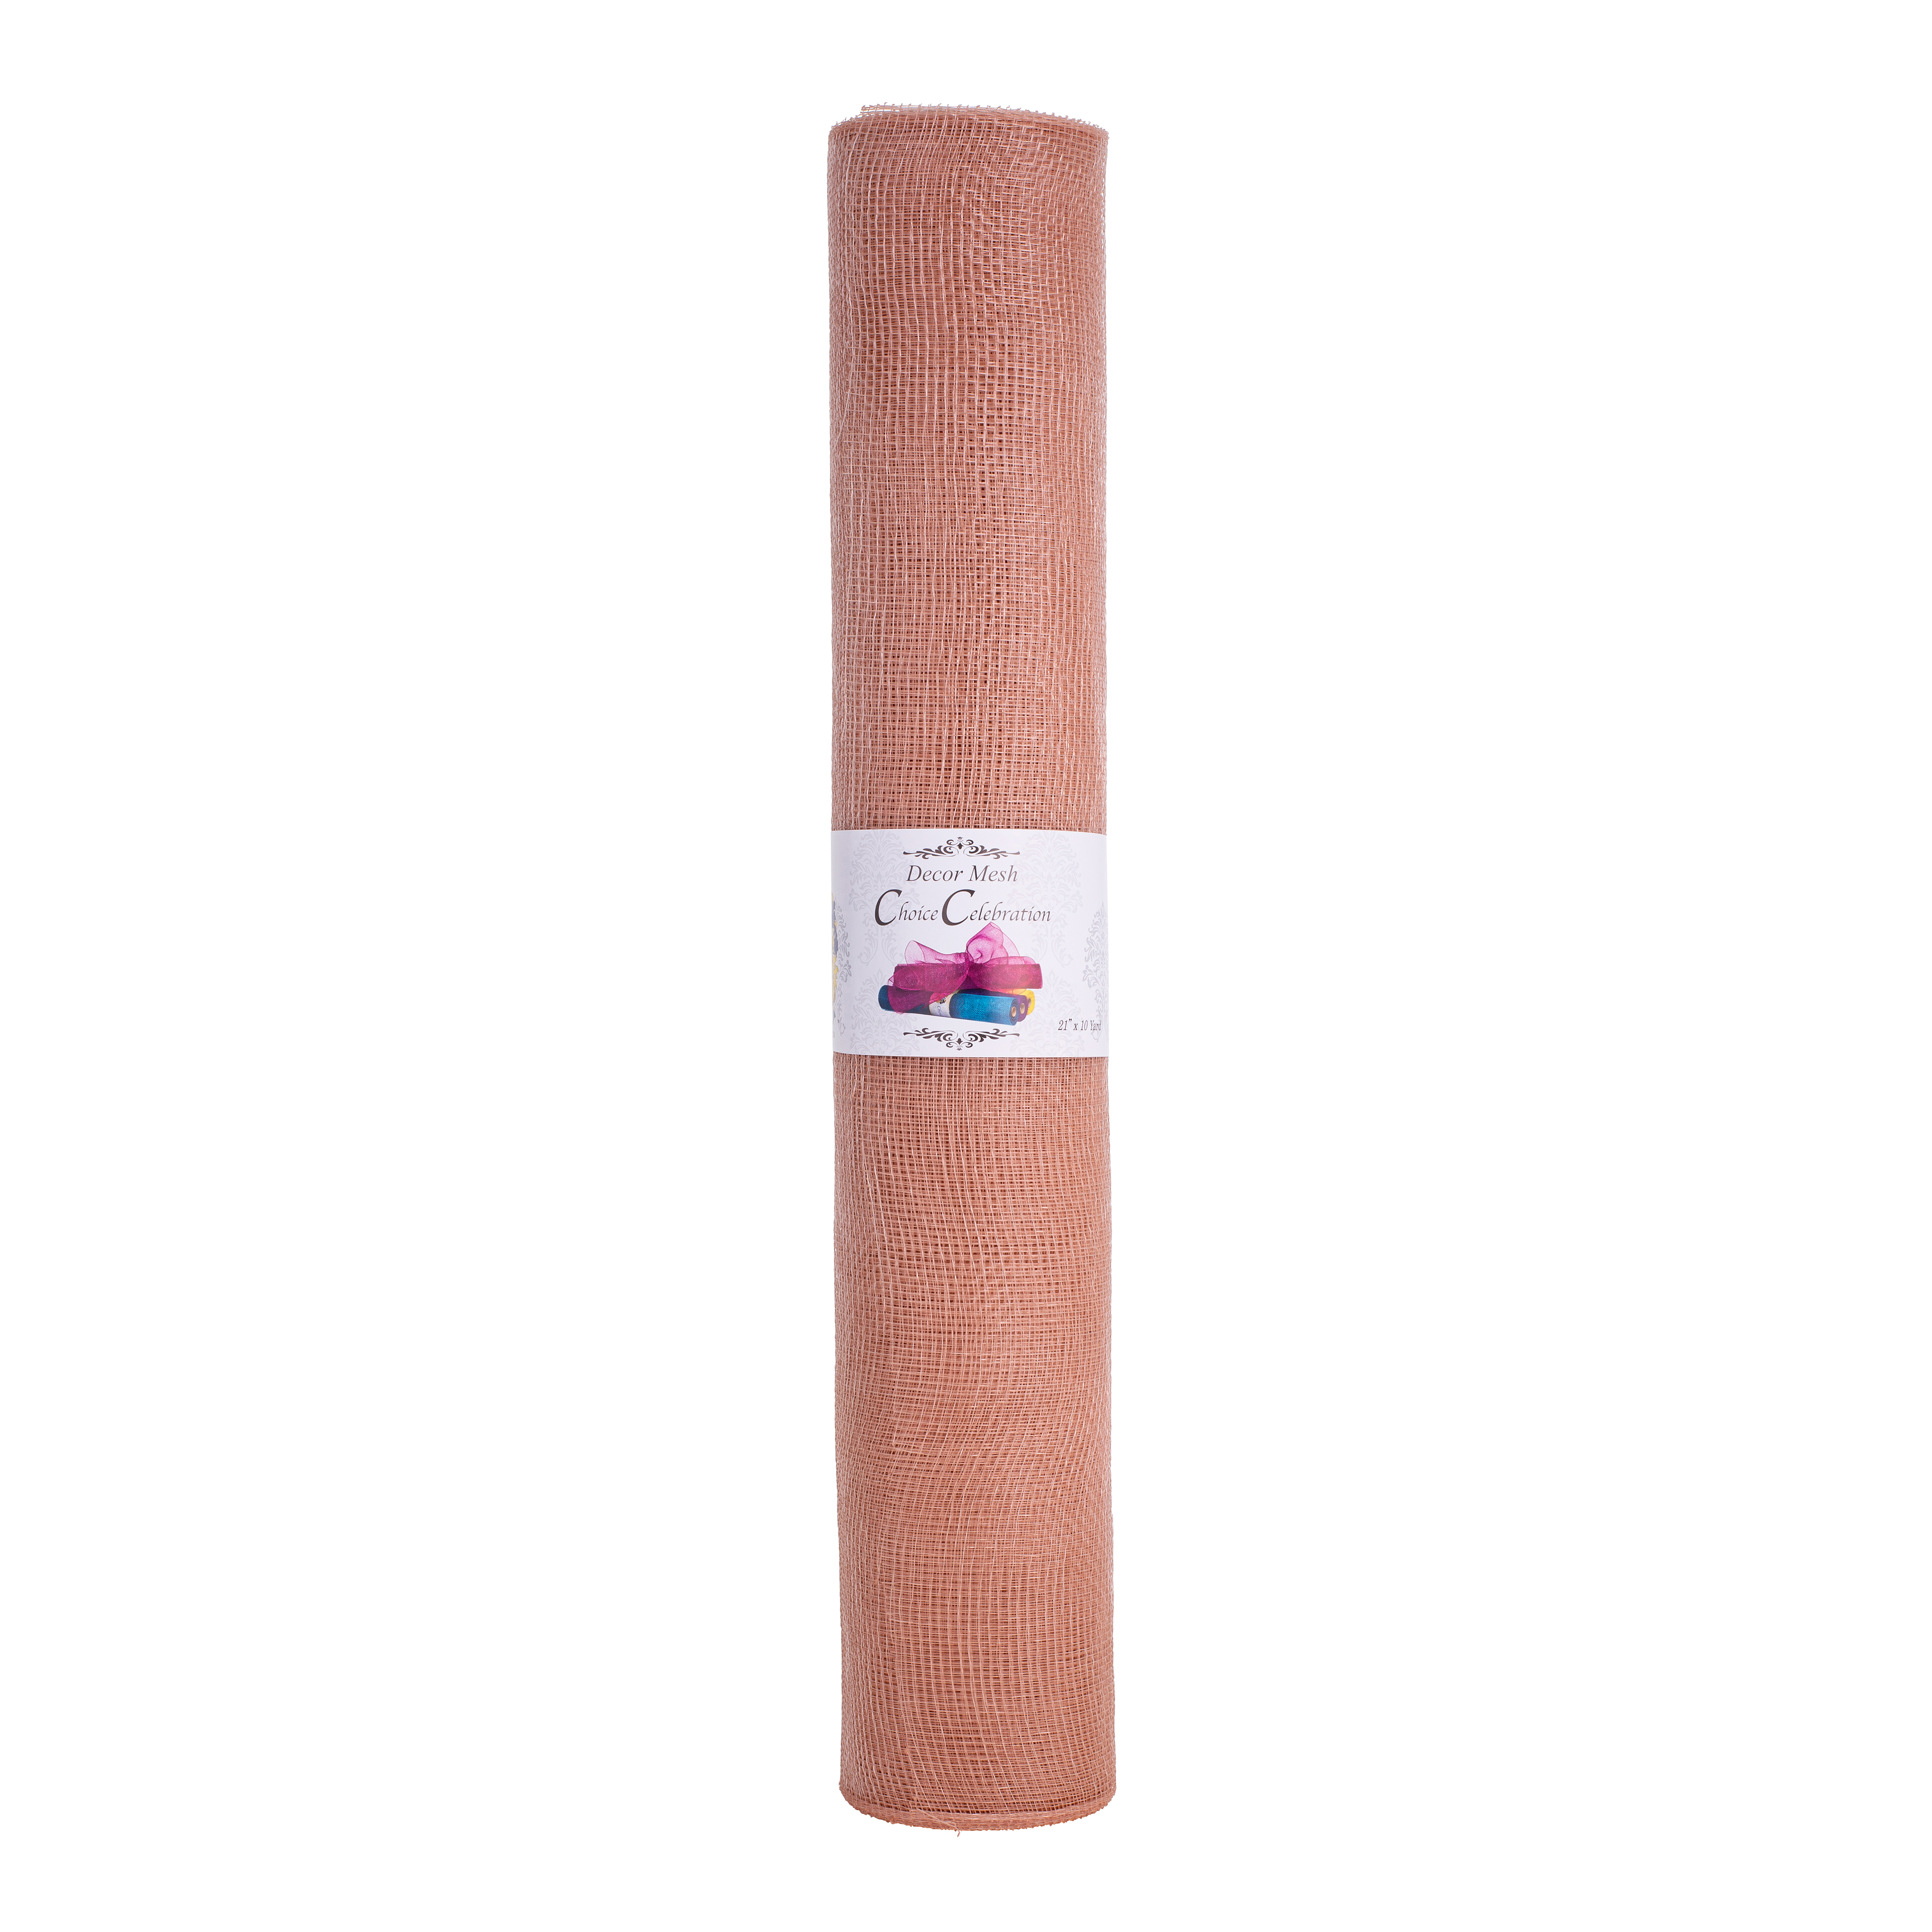 Decorative Poly Mesh Roll - Rose Gold